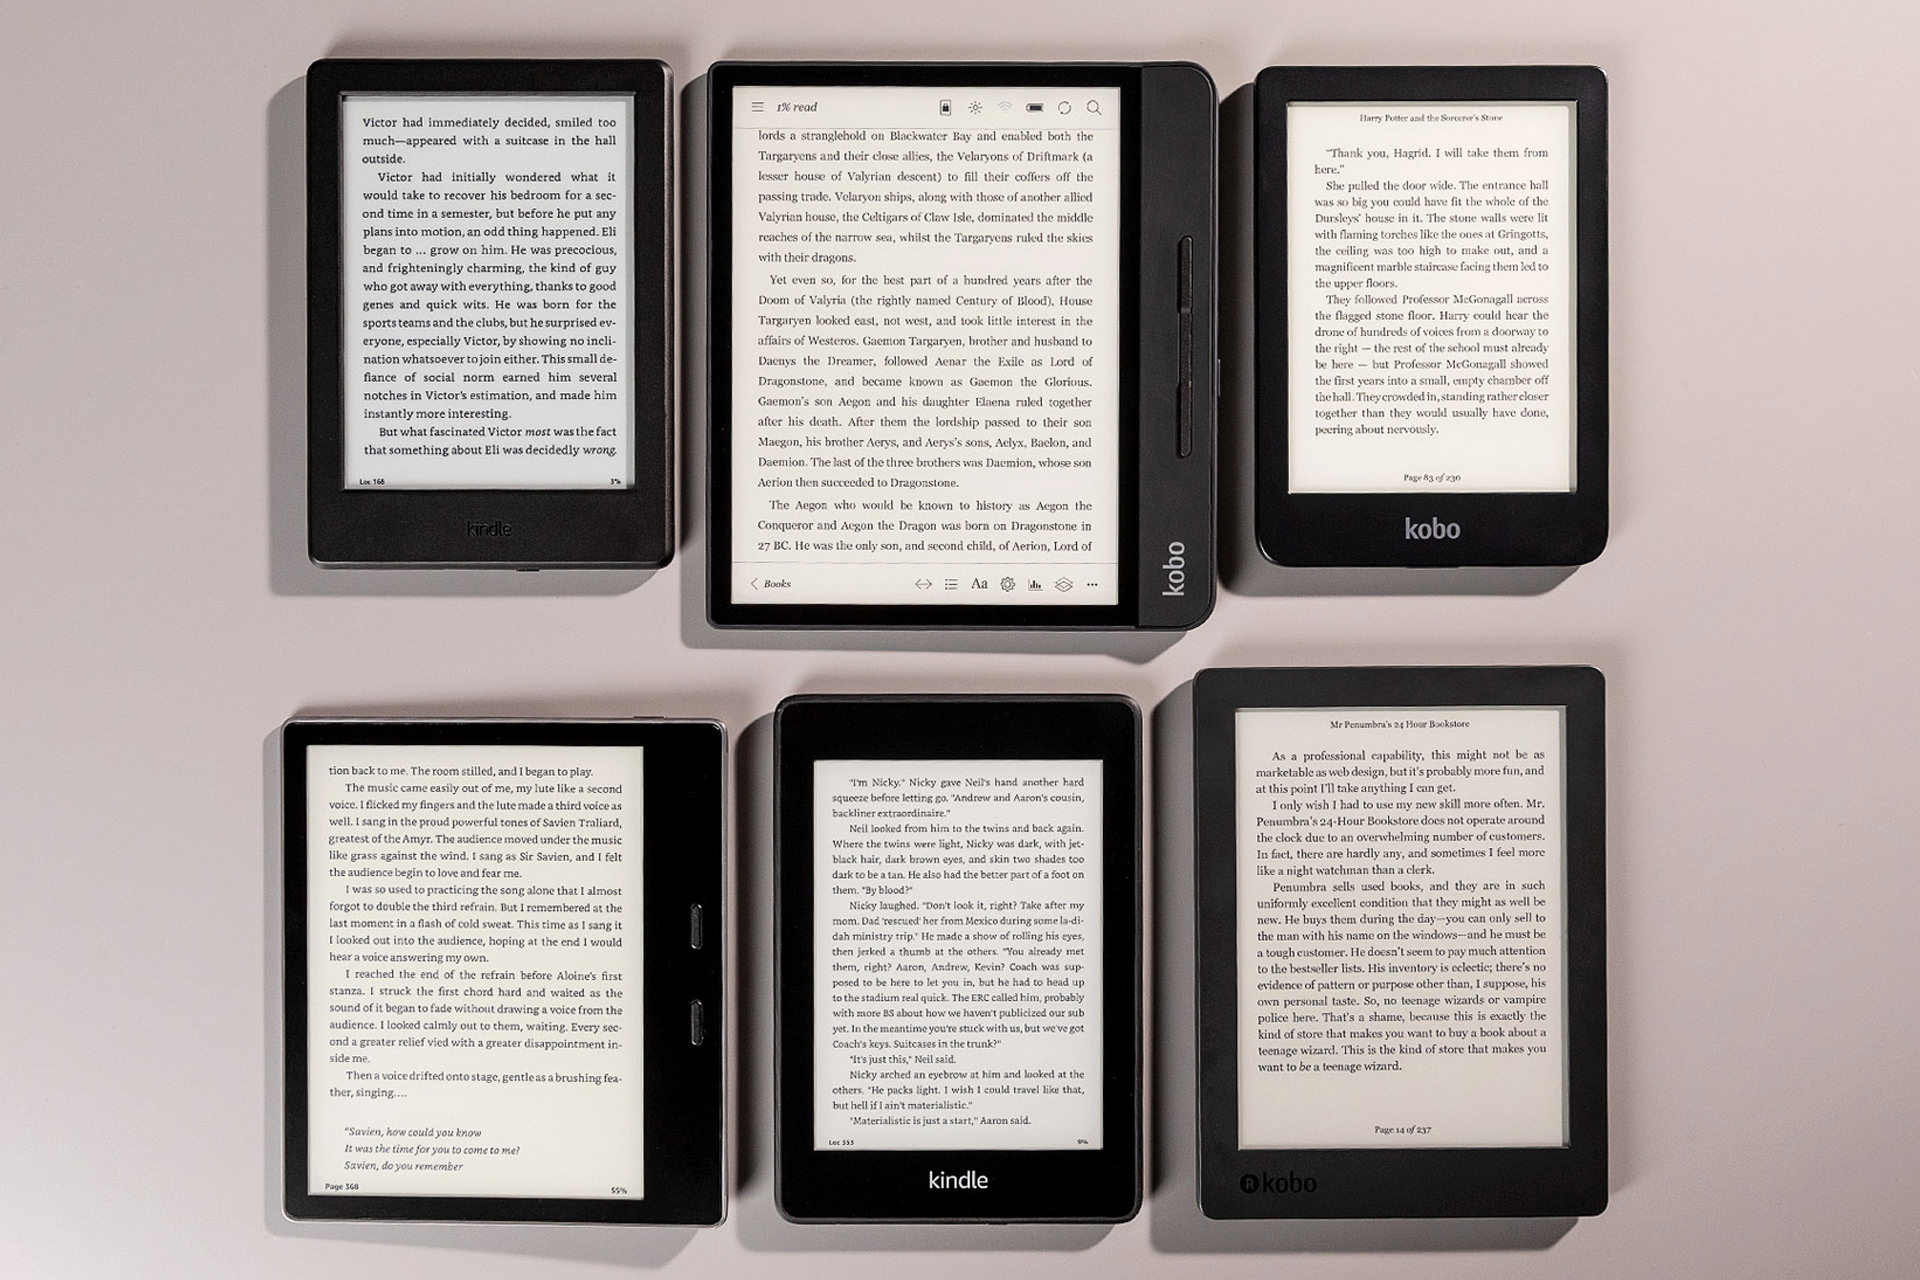 Amazon Kindle and Kobo and other front-facing e-readers